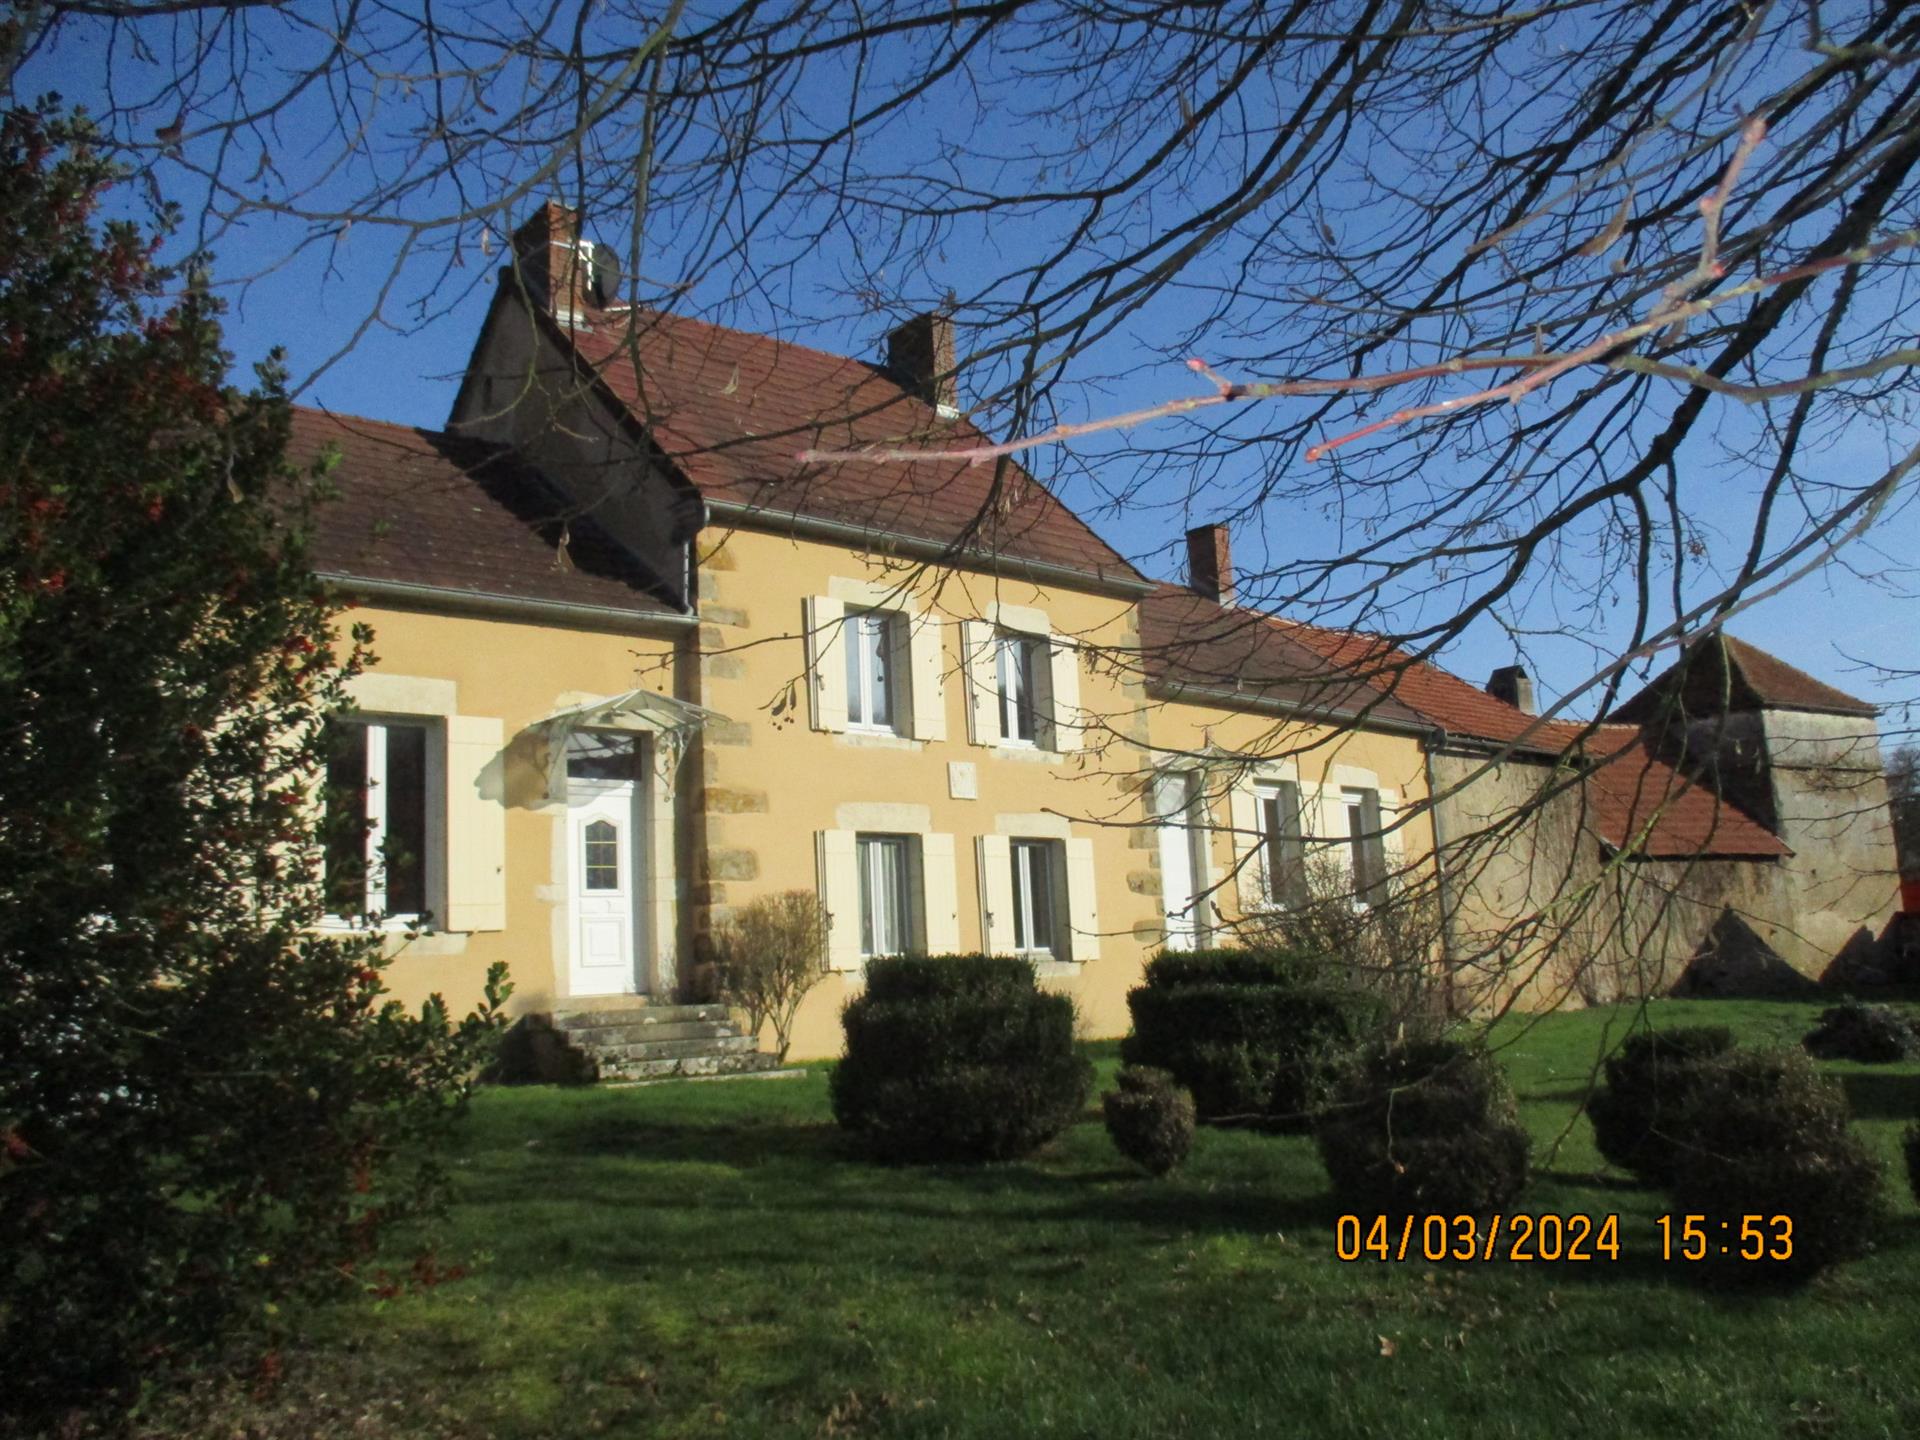 Near Arnayd-le-Duc, Pleasure property with outbuildings and pleasure garden,